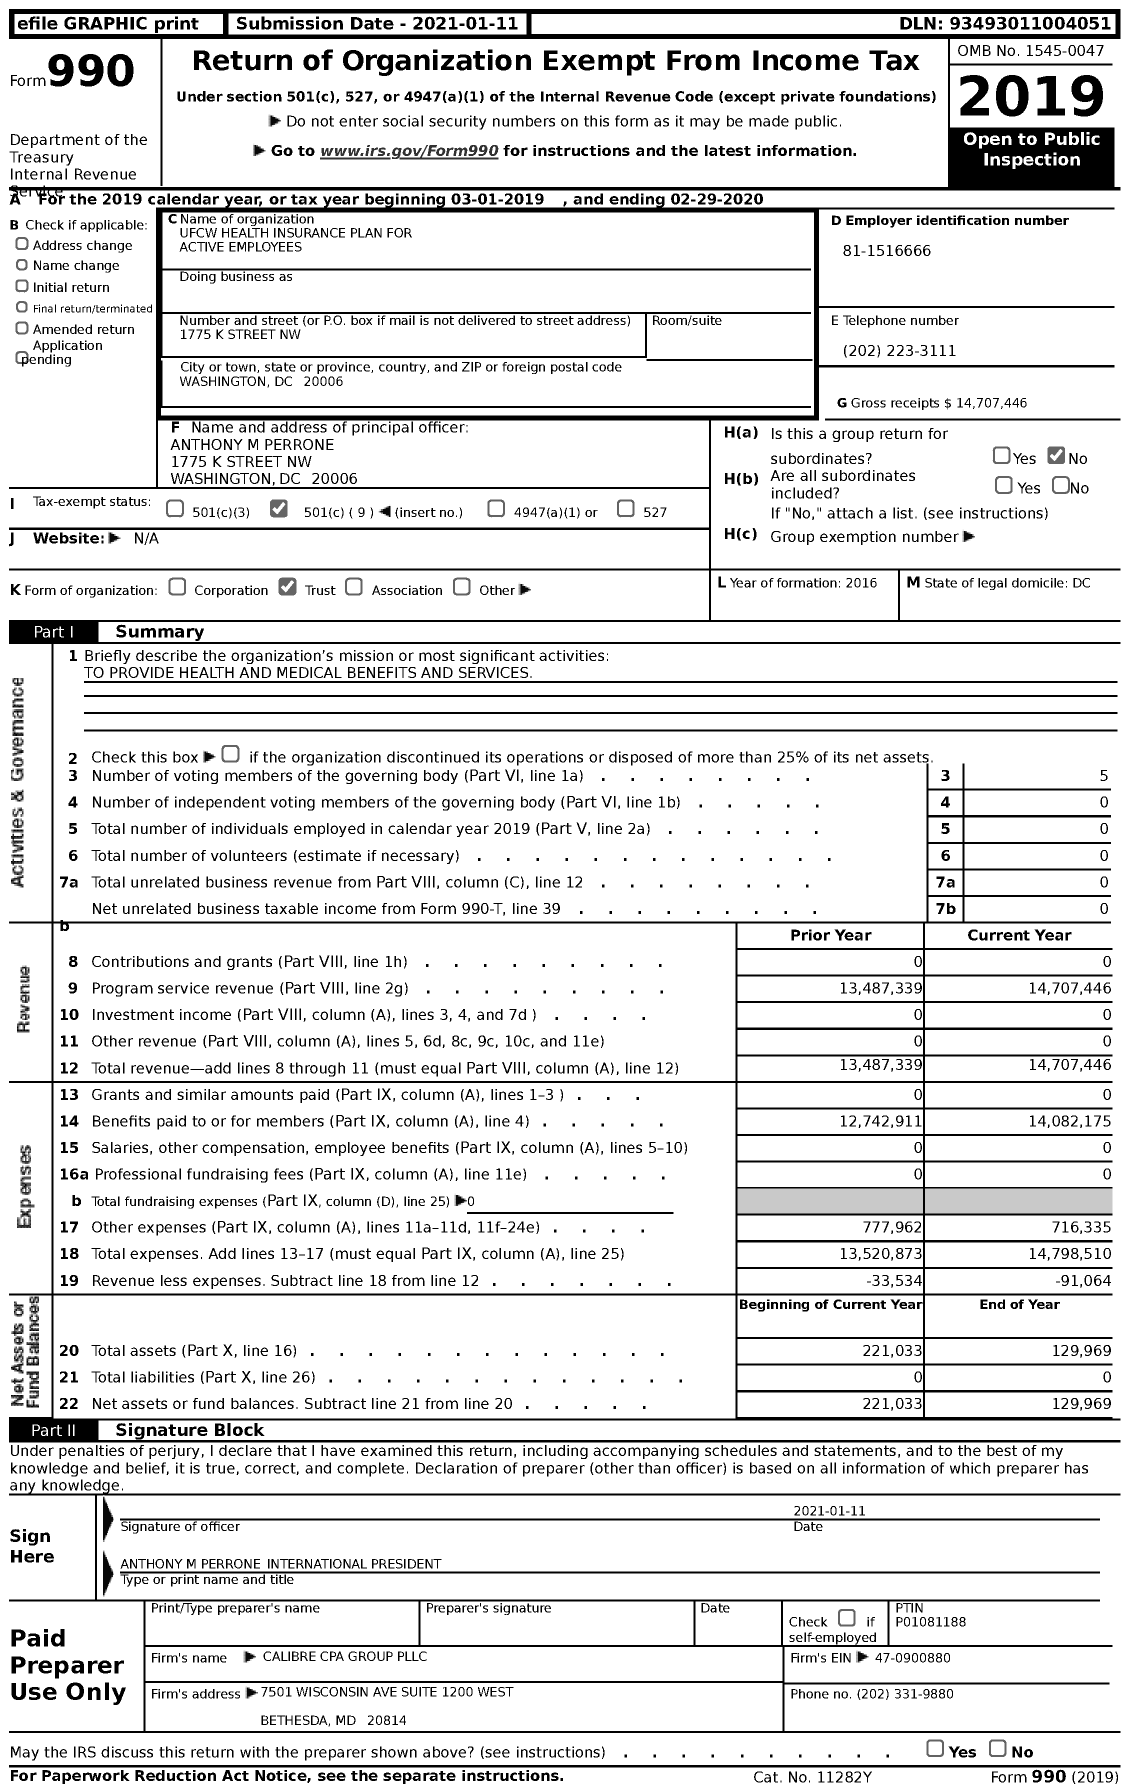 Image of first page of 2019 Form 990 for Ufcw Health Insurance Plan for Active Employees